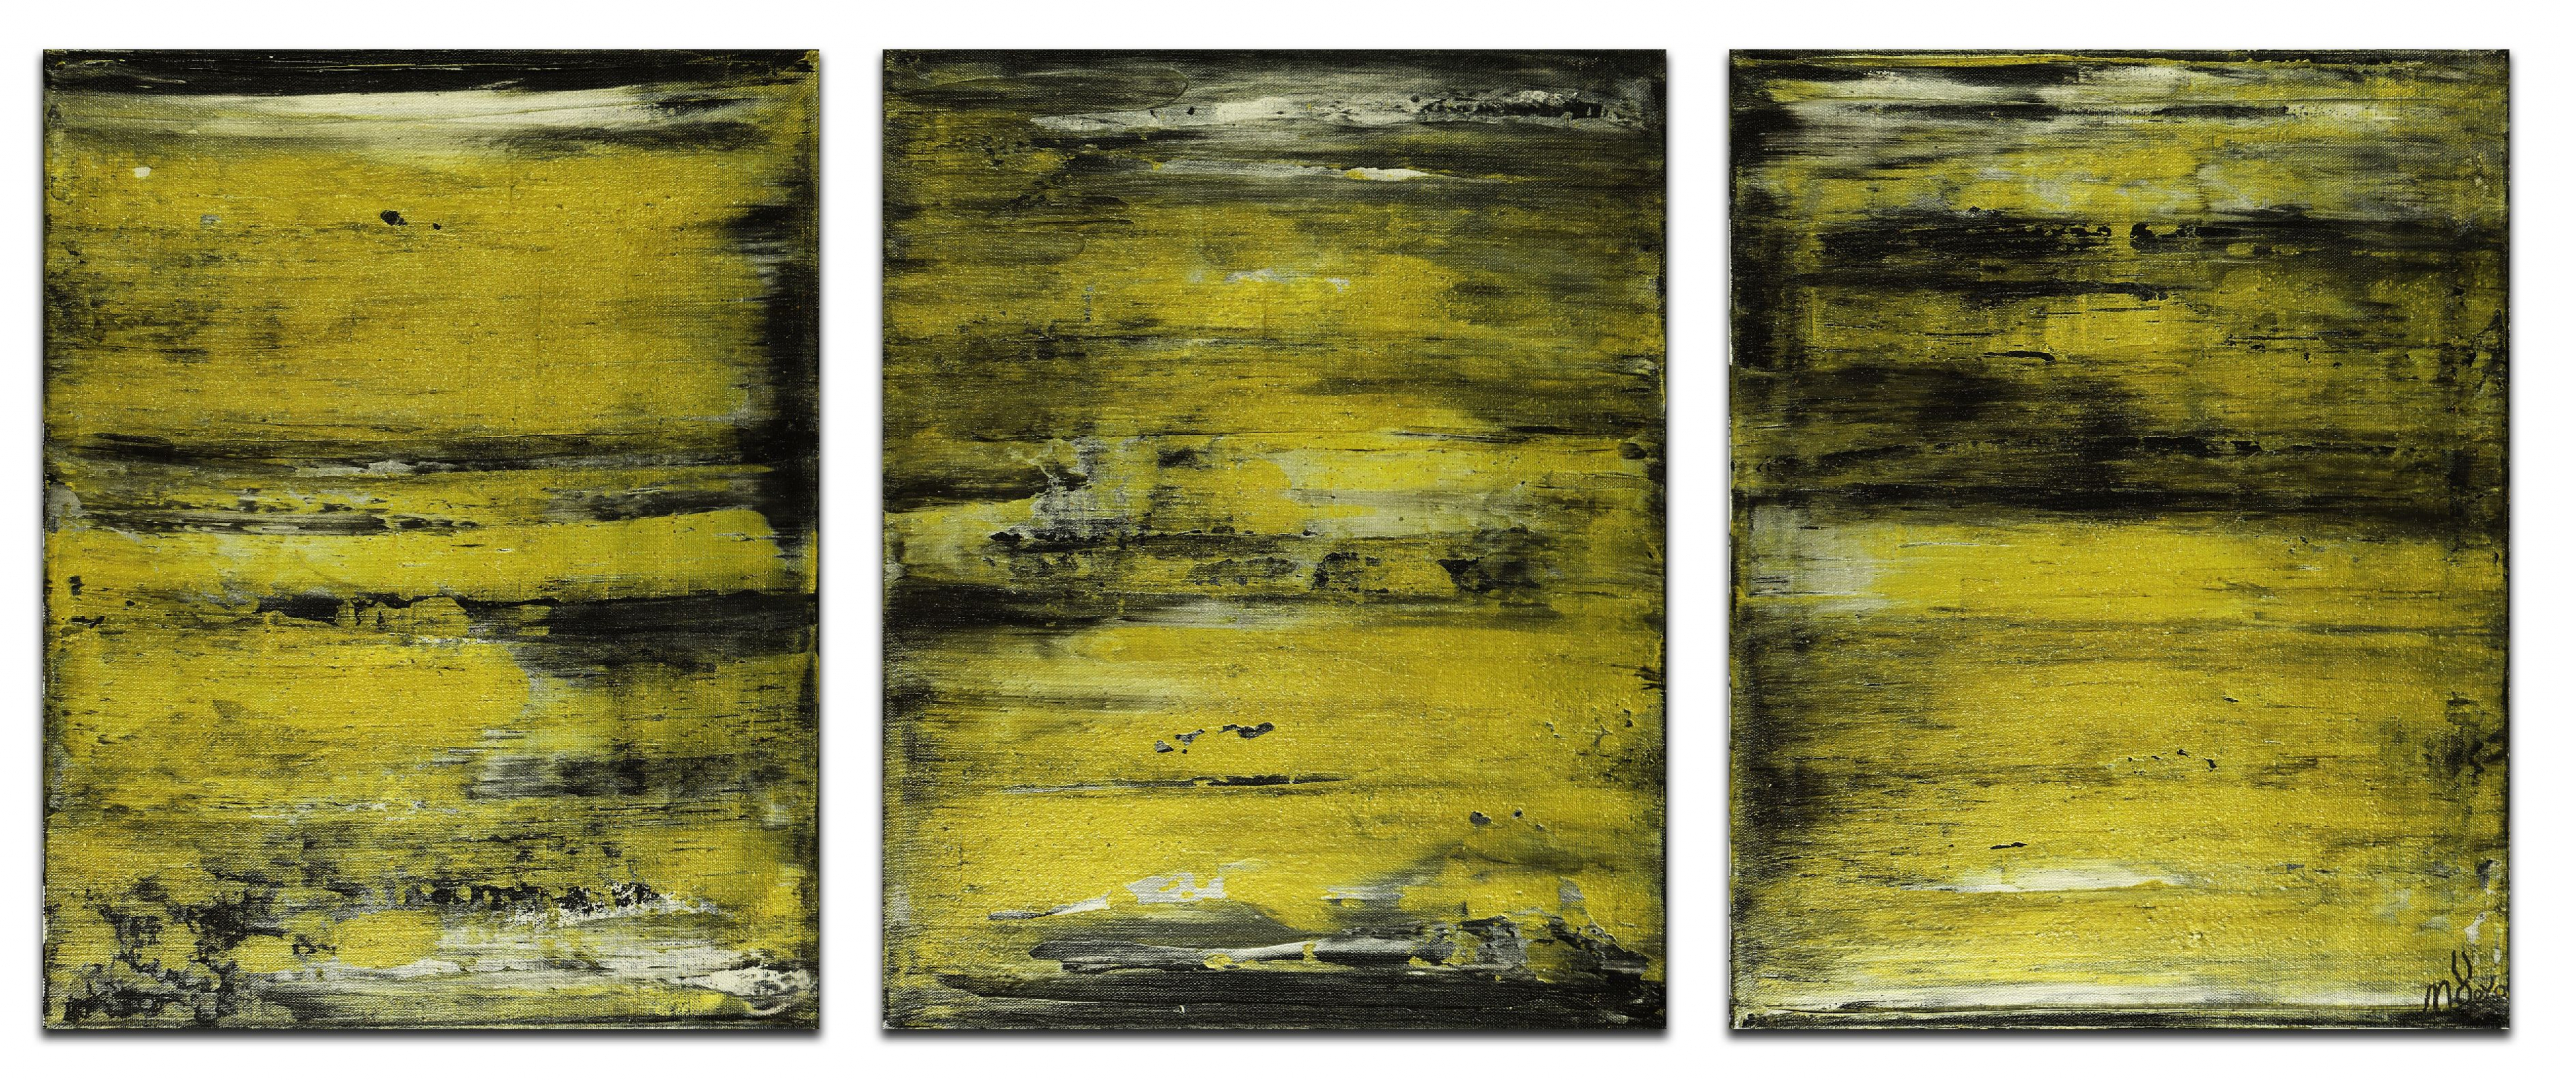 Canvases together with small space between each canvas / Golden Sand Terrain (2020) Triptych by Nestor Toro